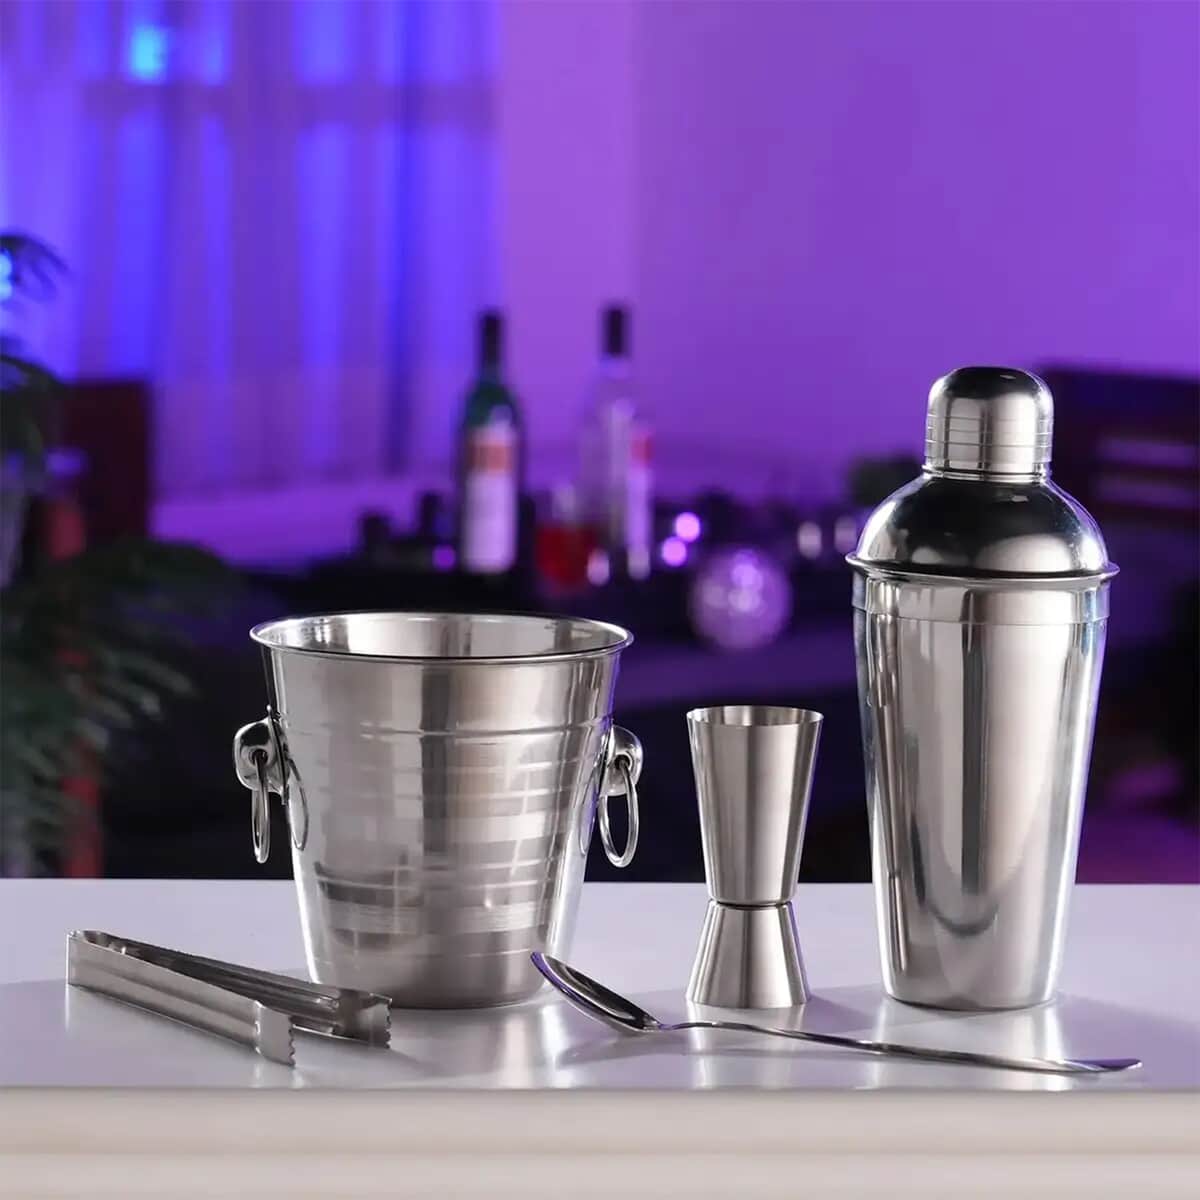 Set of 5 Stainless Steel Bar Set - Cocktail Shaker 500 ml, Ice Tong, Ice Bucket - 800 ml, Peg maker 30/60ml, Cocktail Spoon - Silver image number 1